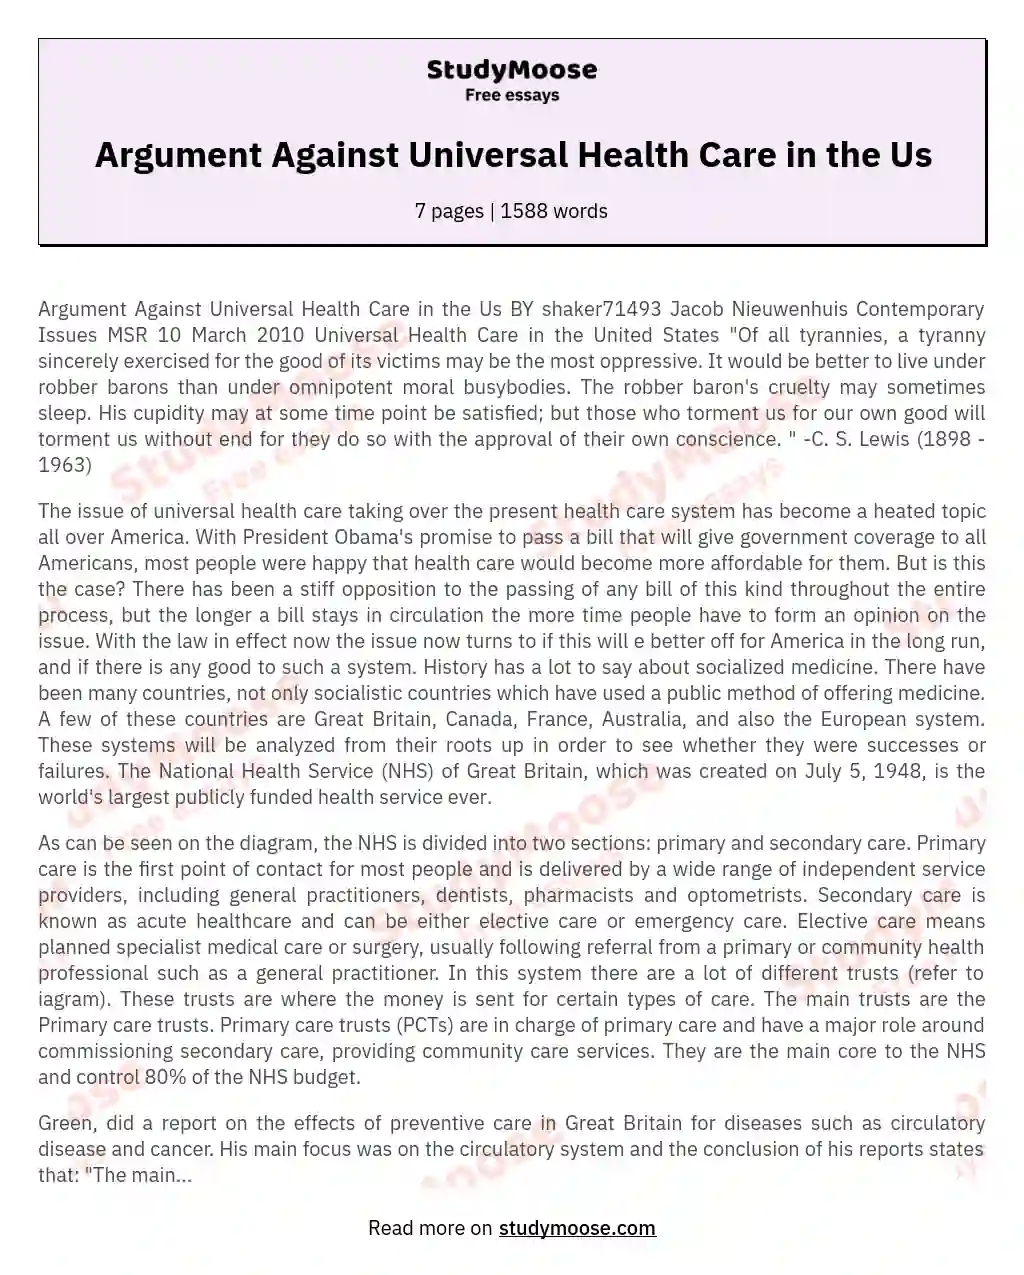 Argument Against Universal Health Care in the Us essay